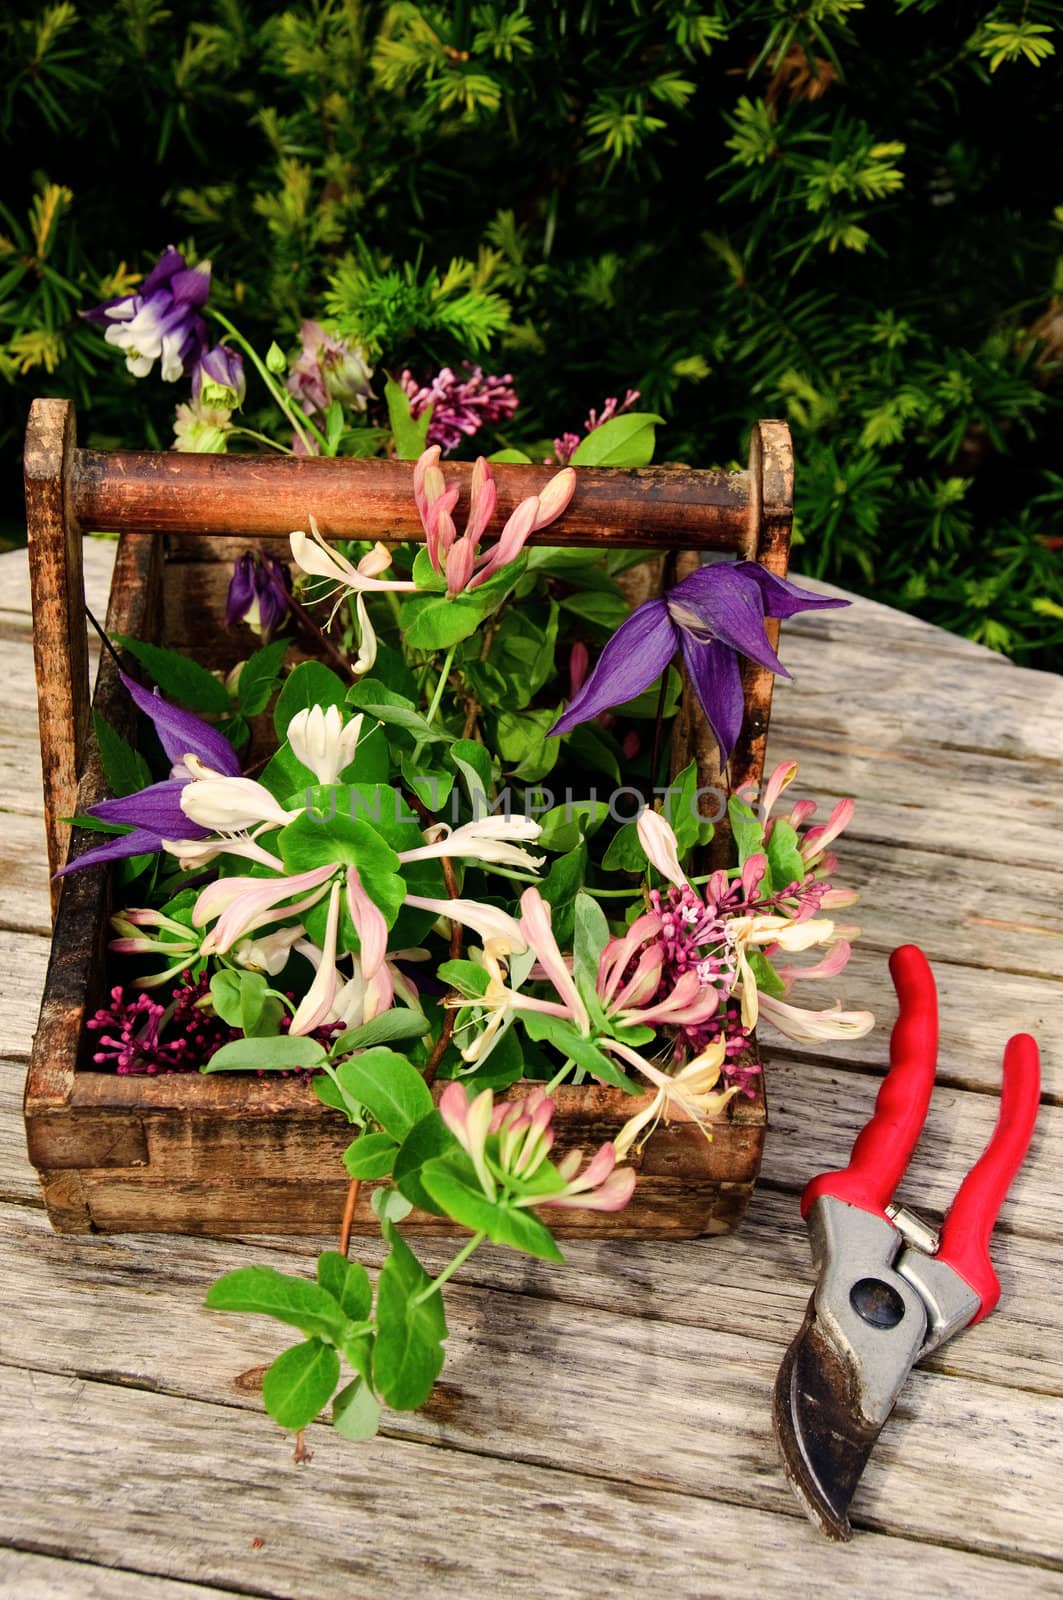 Fresh cut flowers from the garden in a wooden tray